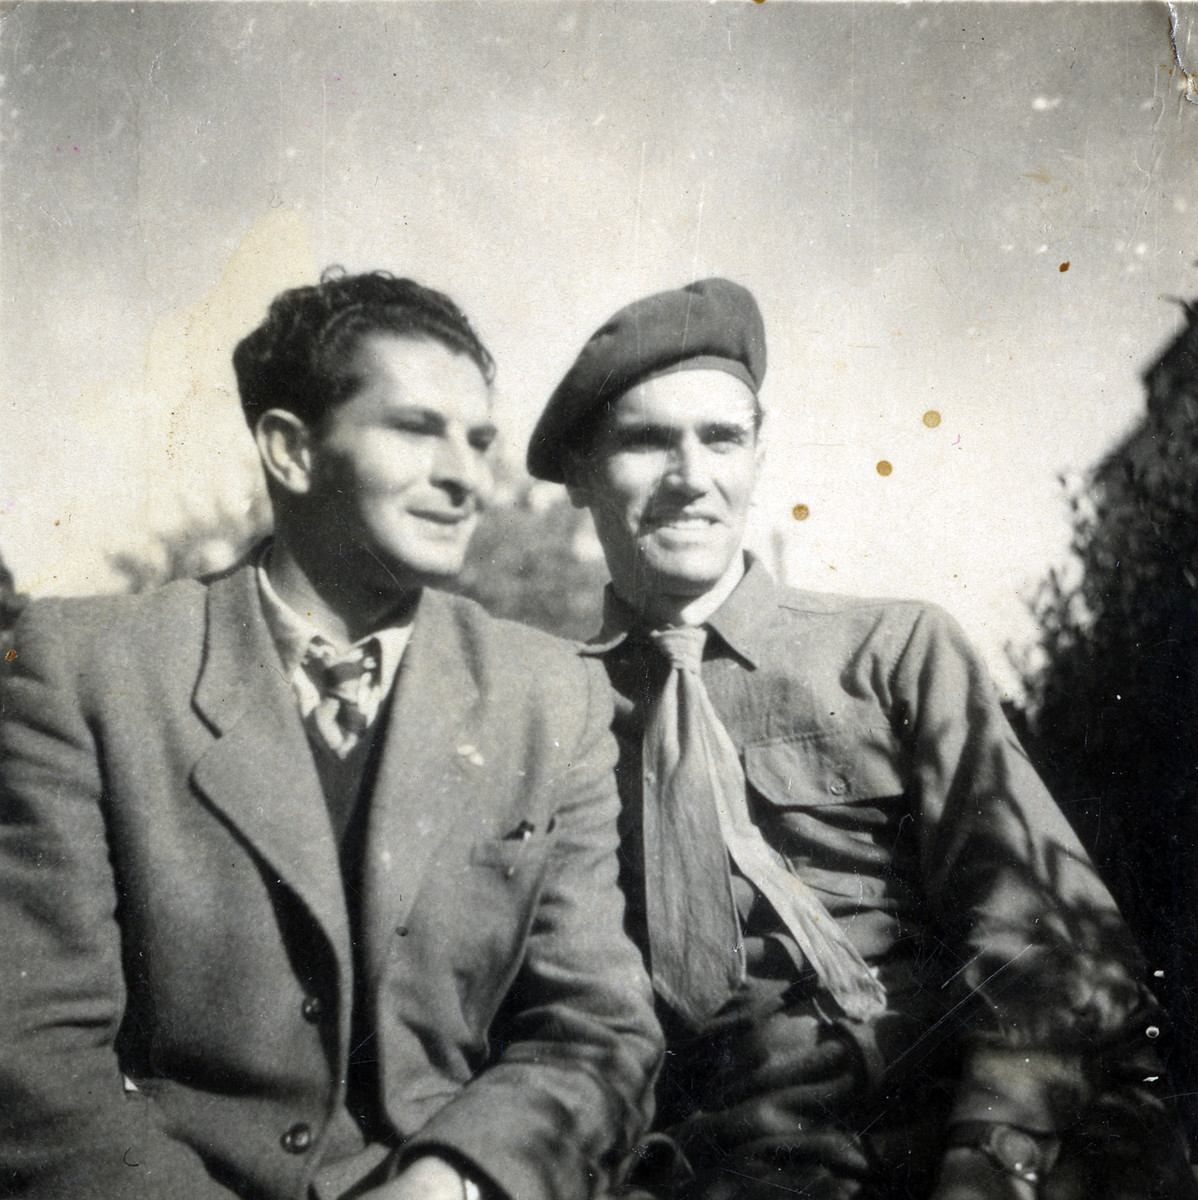 Close-up portrait of Ernst Hellinger (right) with Zoltan Yakubovich (left).